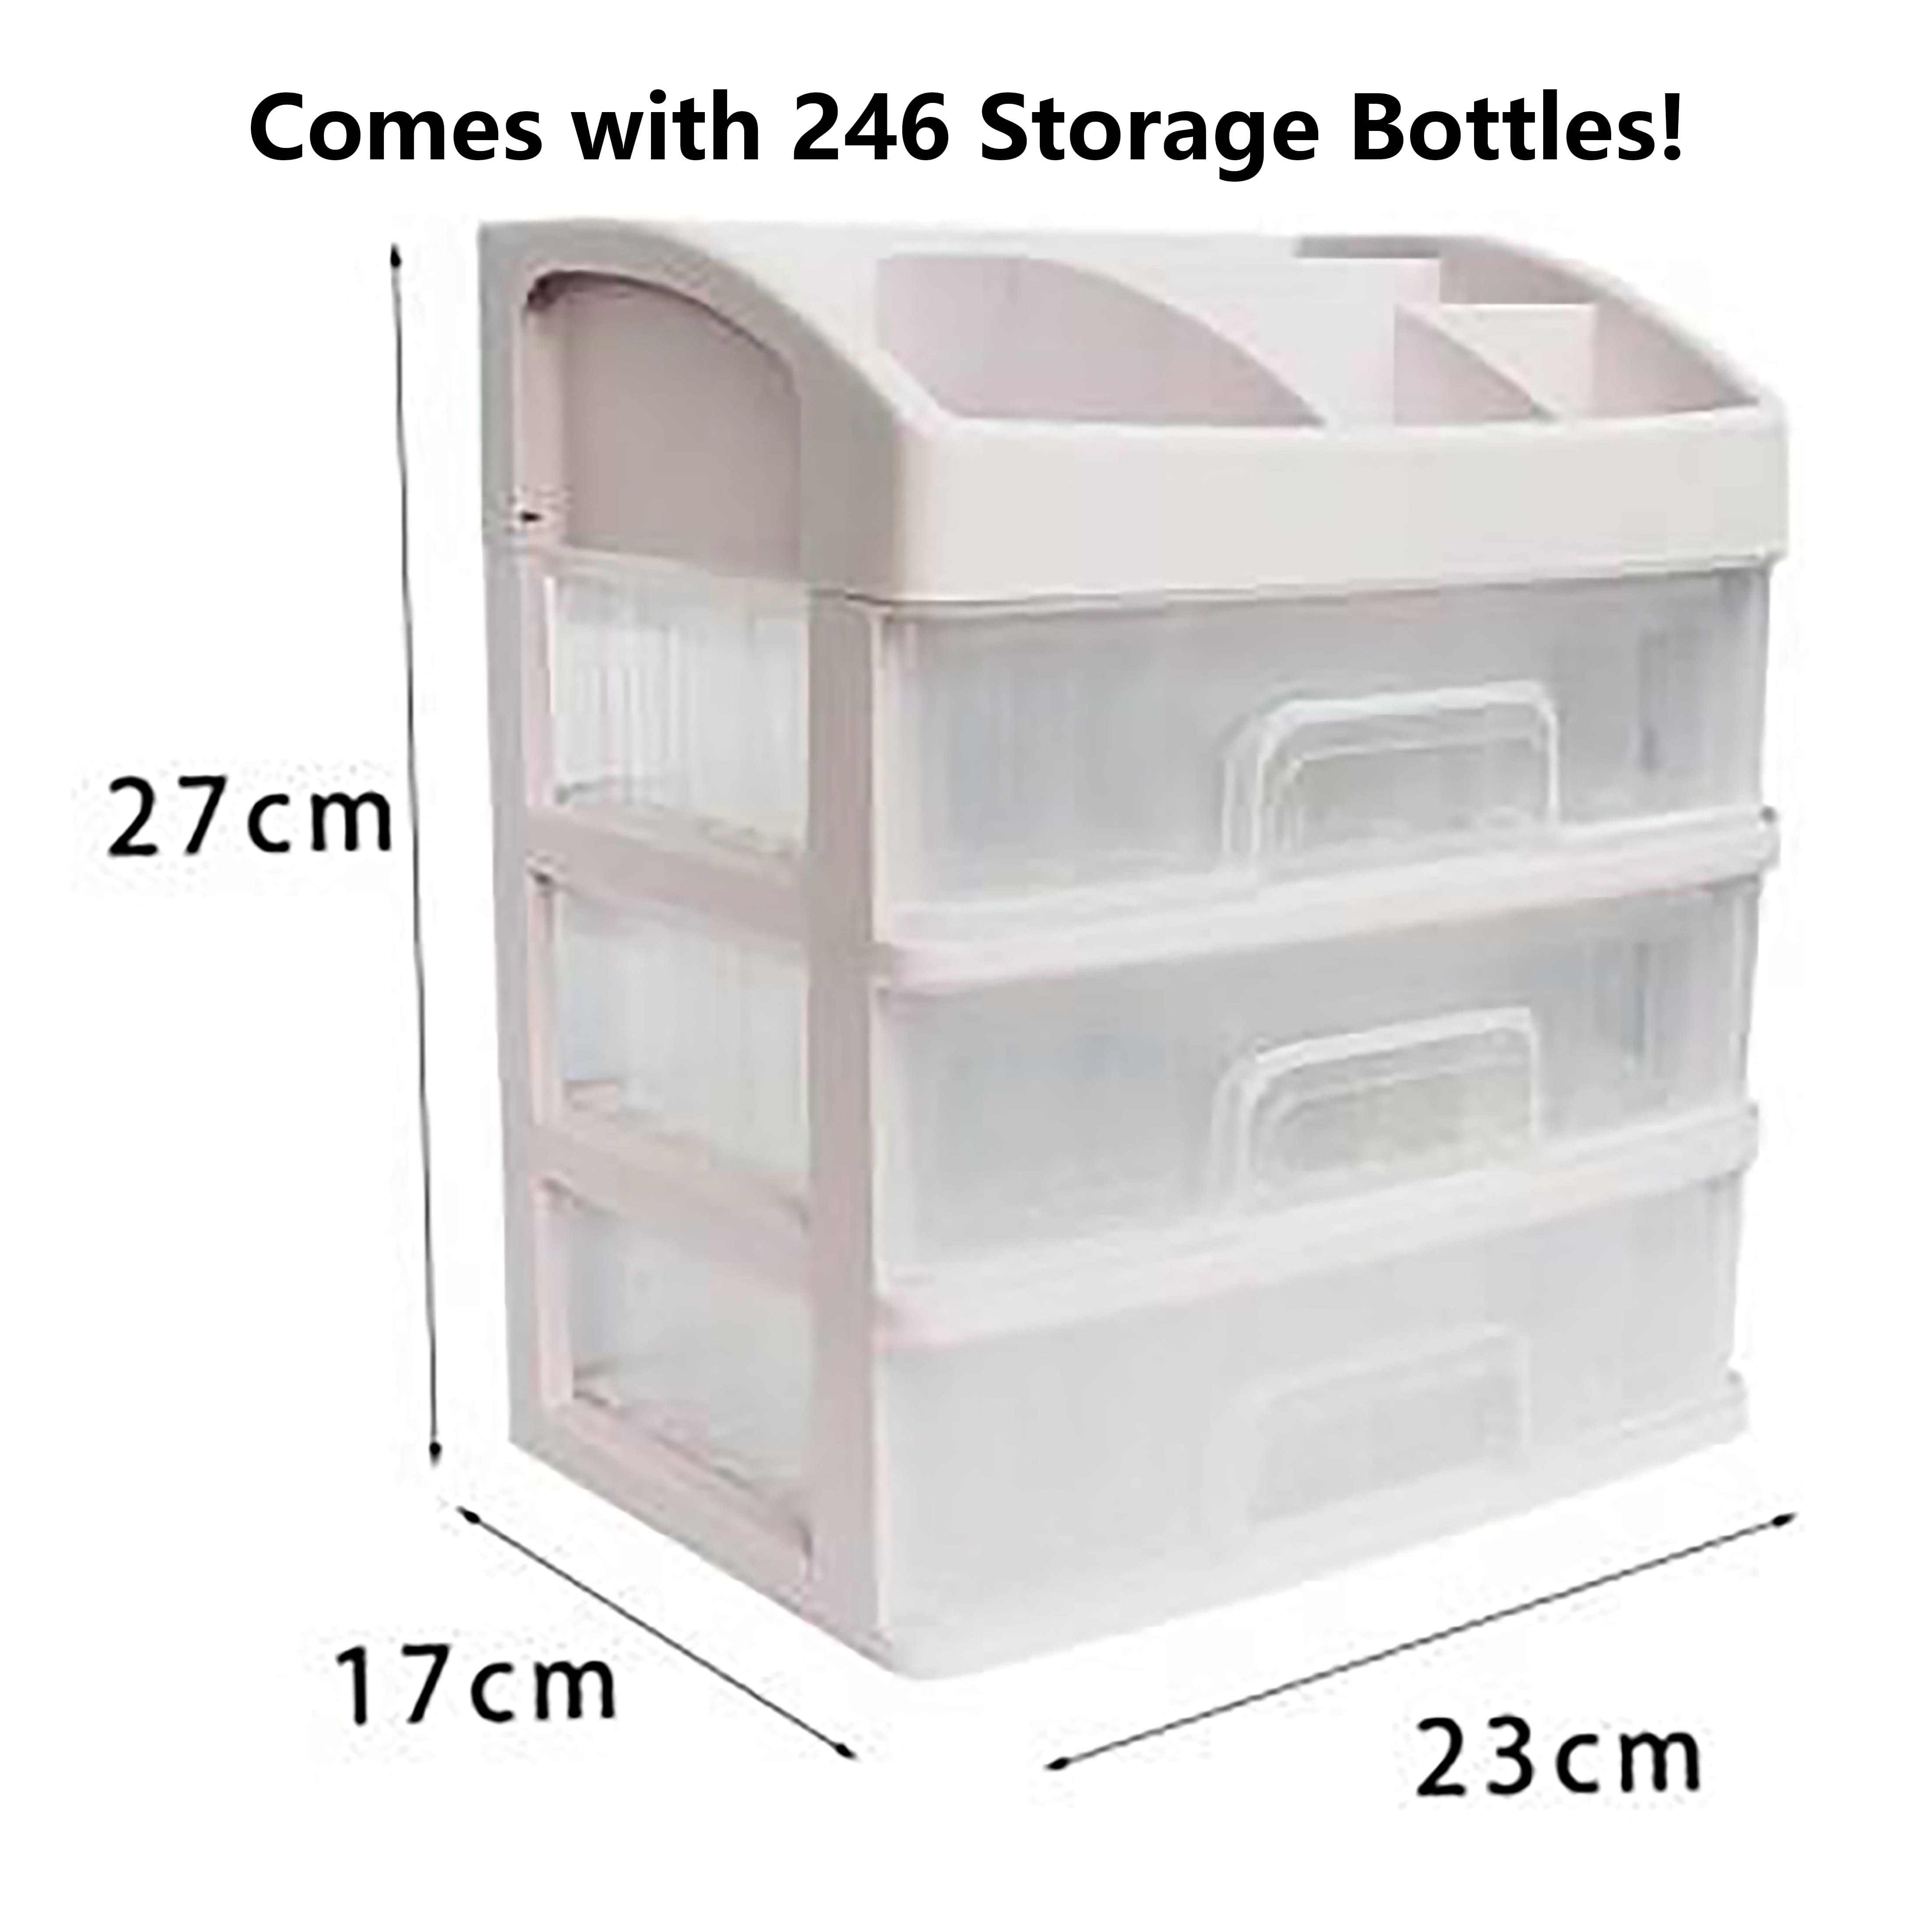 Sparkly Selections Diamond Painting Storage Container with 246 Square Bottles